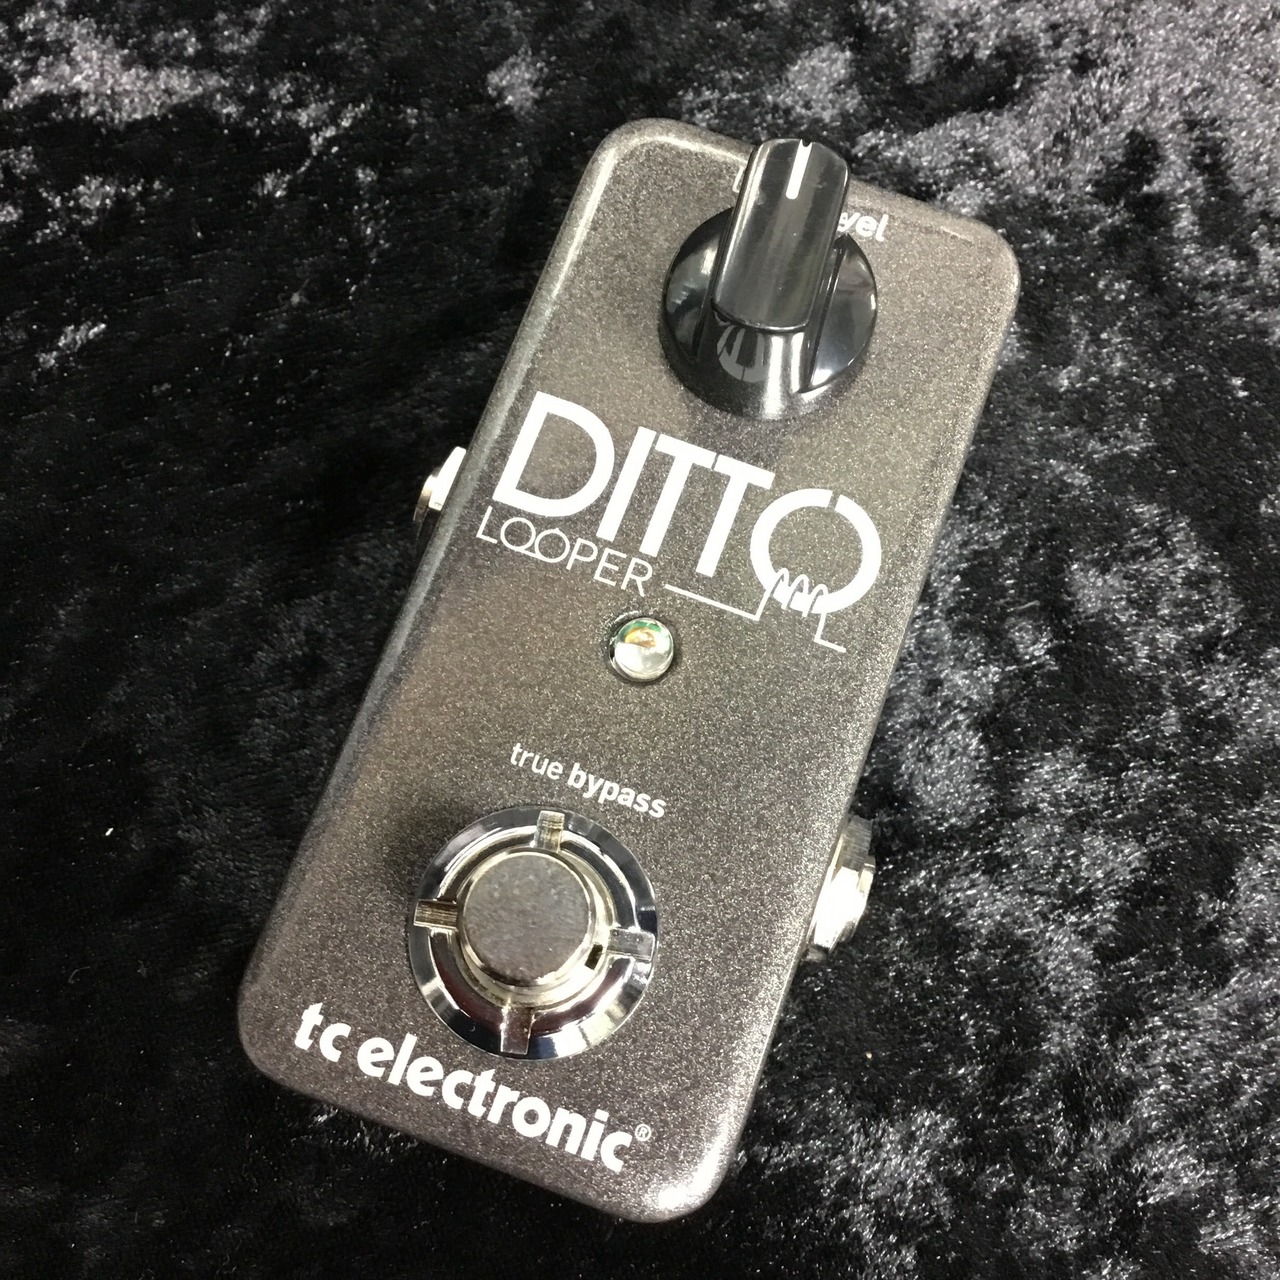 DITTO LOOPER / tc electronic